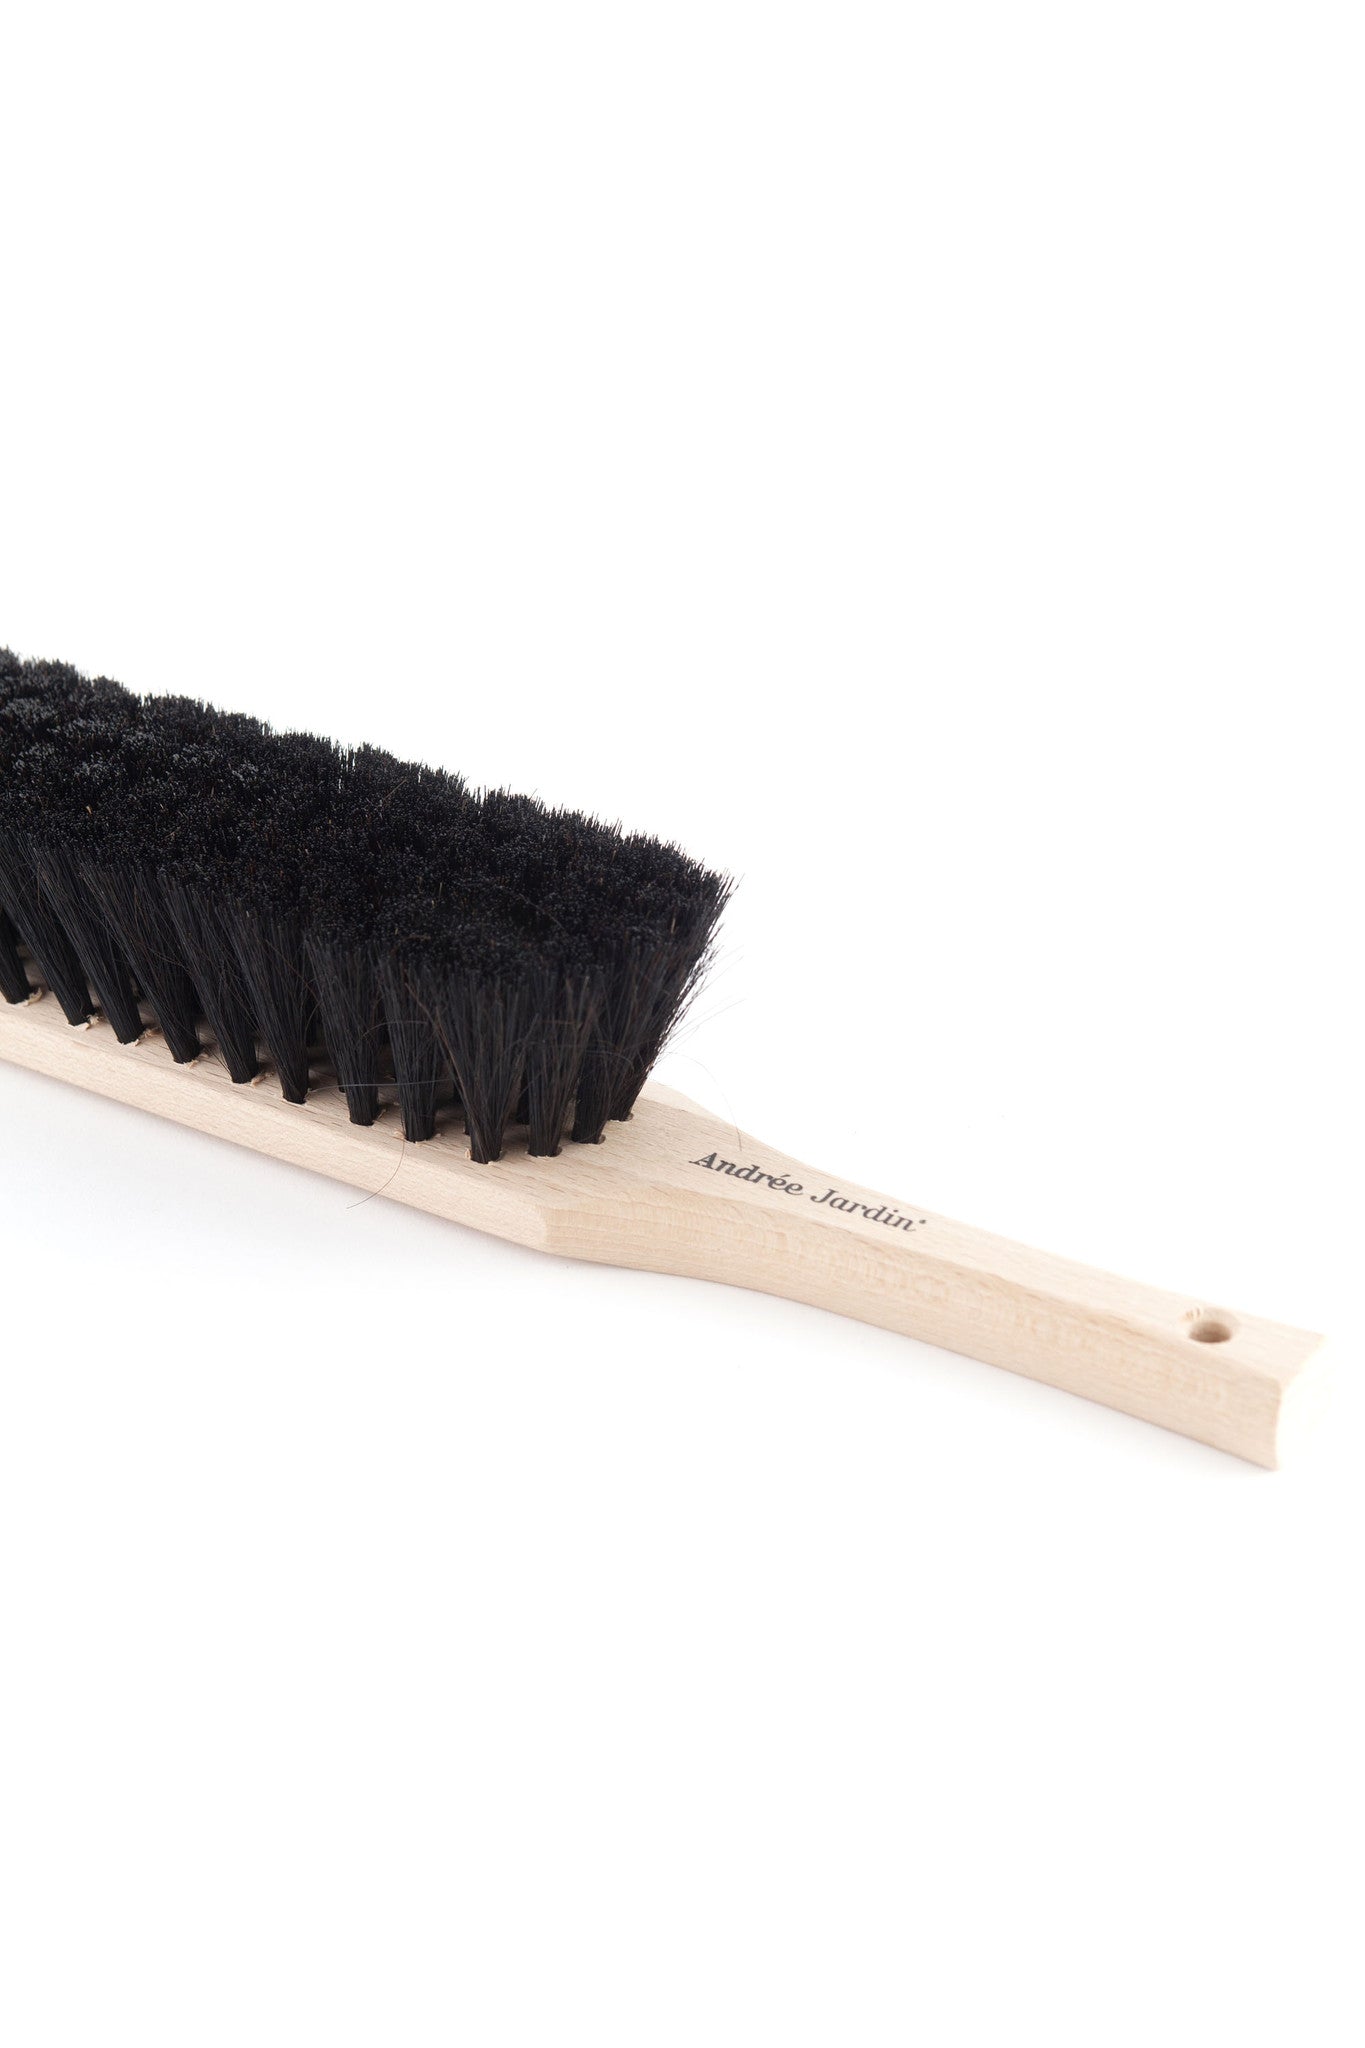 Andrée Jardin Tradition Beech Wood Handled Brush Utilities Andrée Jardin Andrée Jardin Back in stock Brand_Andrée Jardin Home_Broom Sets Home_Household Cleaning Summer Clean Up 5300-1302_B